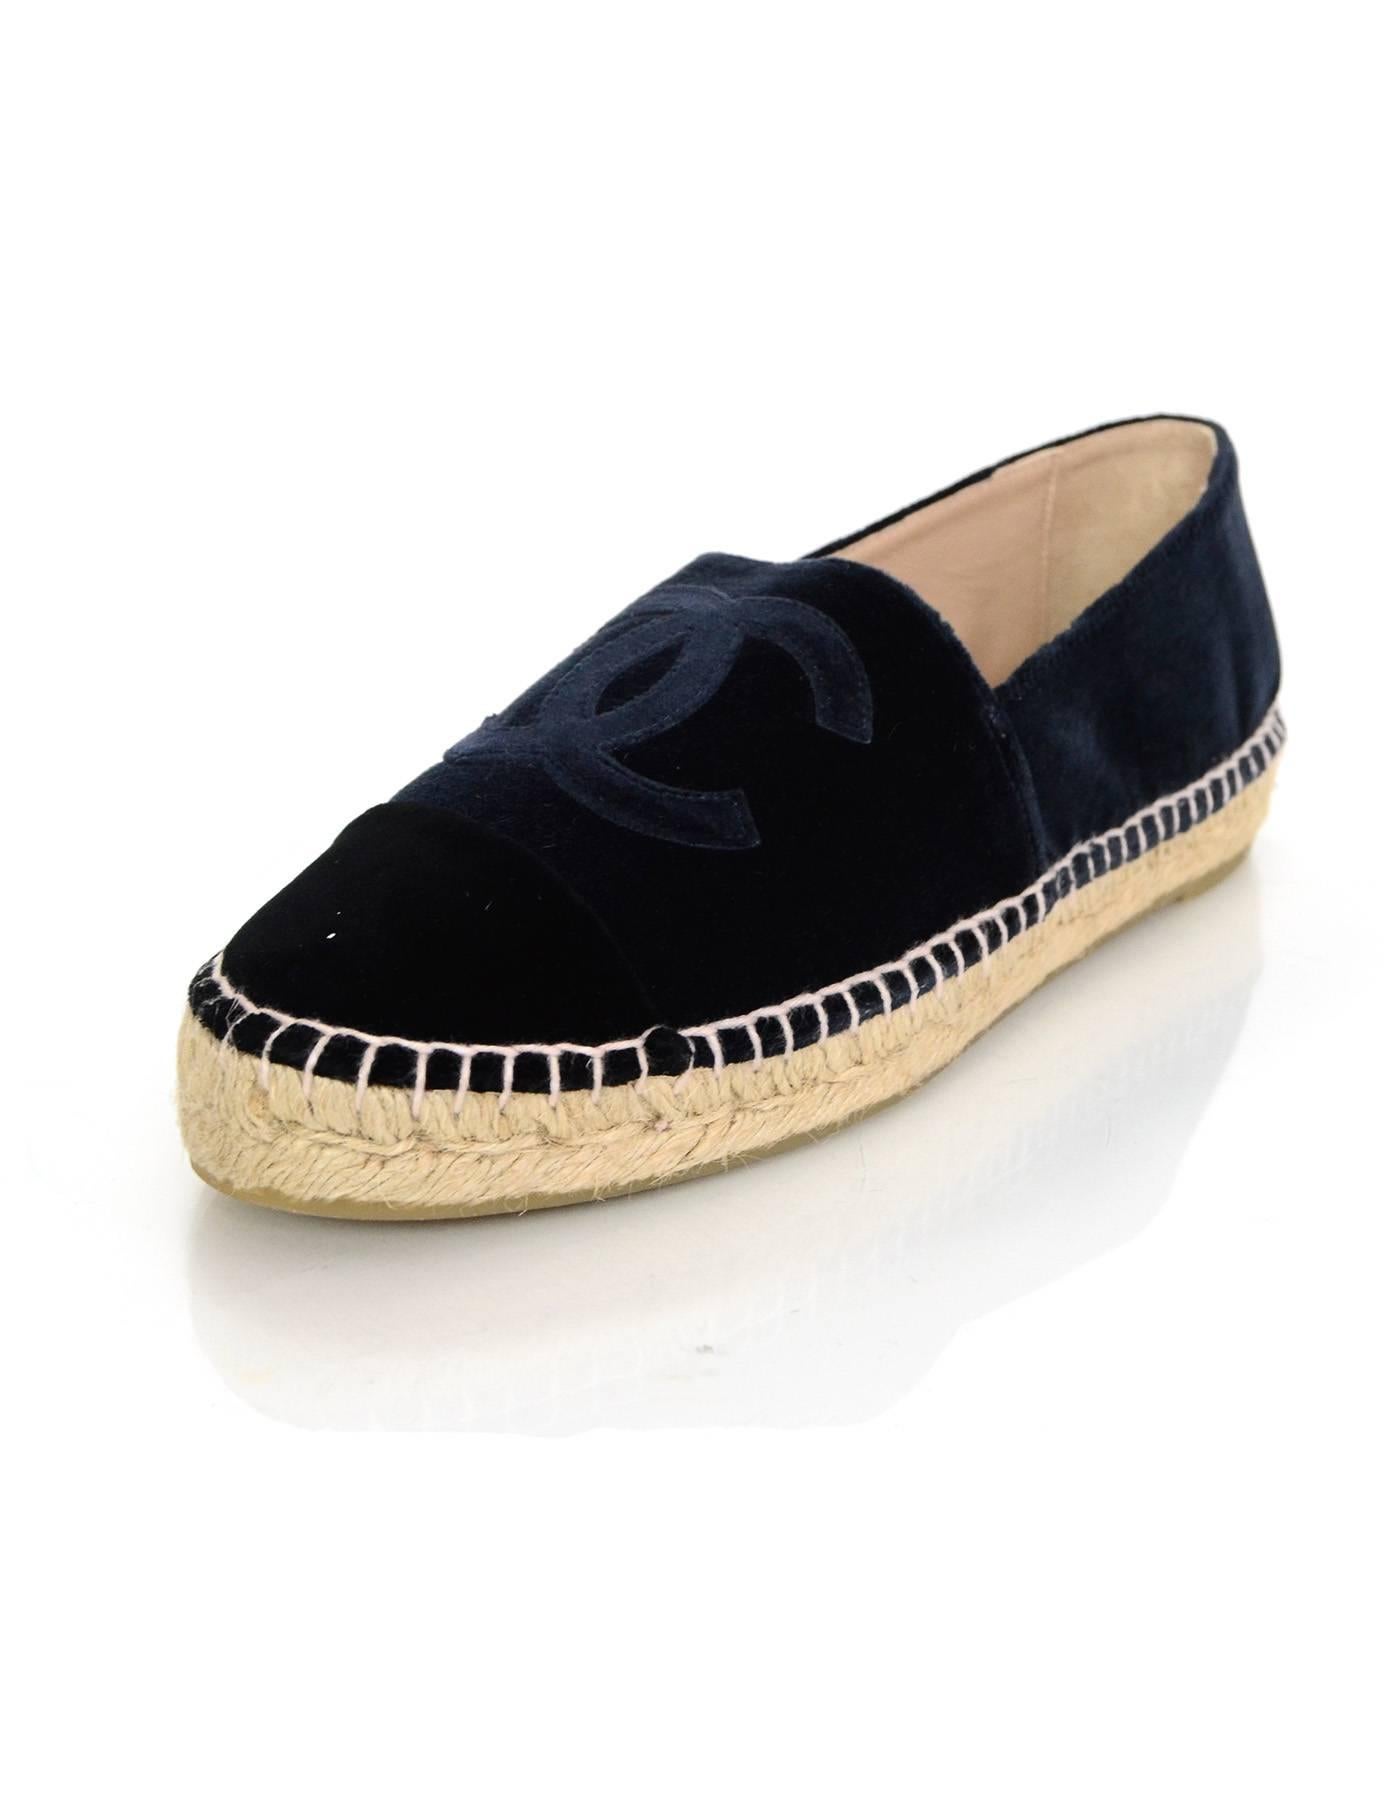 Chanel Navy Velvet Espadrilles Sz 39 NIB

Made In: Spain
Color: Navy
Materials: Velvet, jute rope
Closure/Opening: Slide on
Sole Stamp: Made in Spain 39 Chanel CC
Overall Condition: Excellent pre-owned condition - NIB
Included: Chanel box, dust